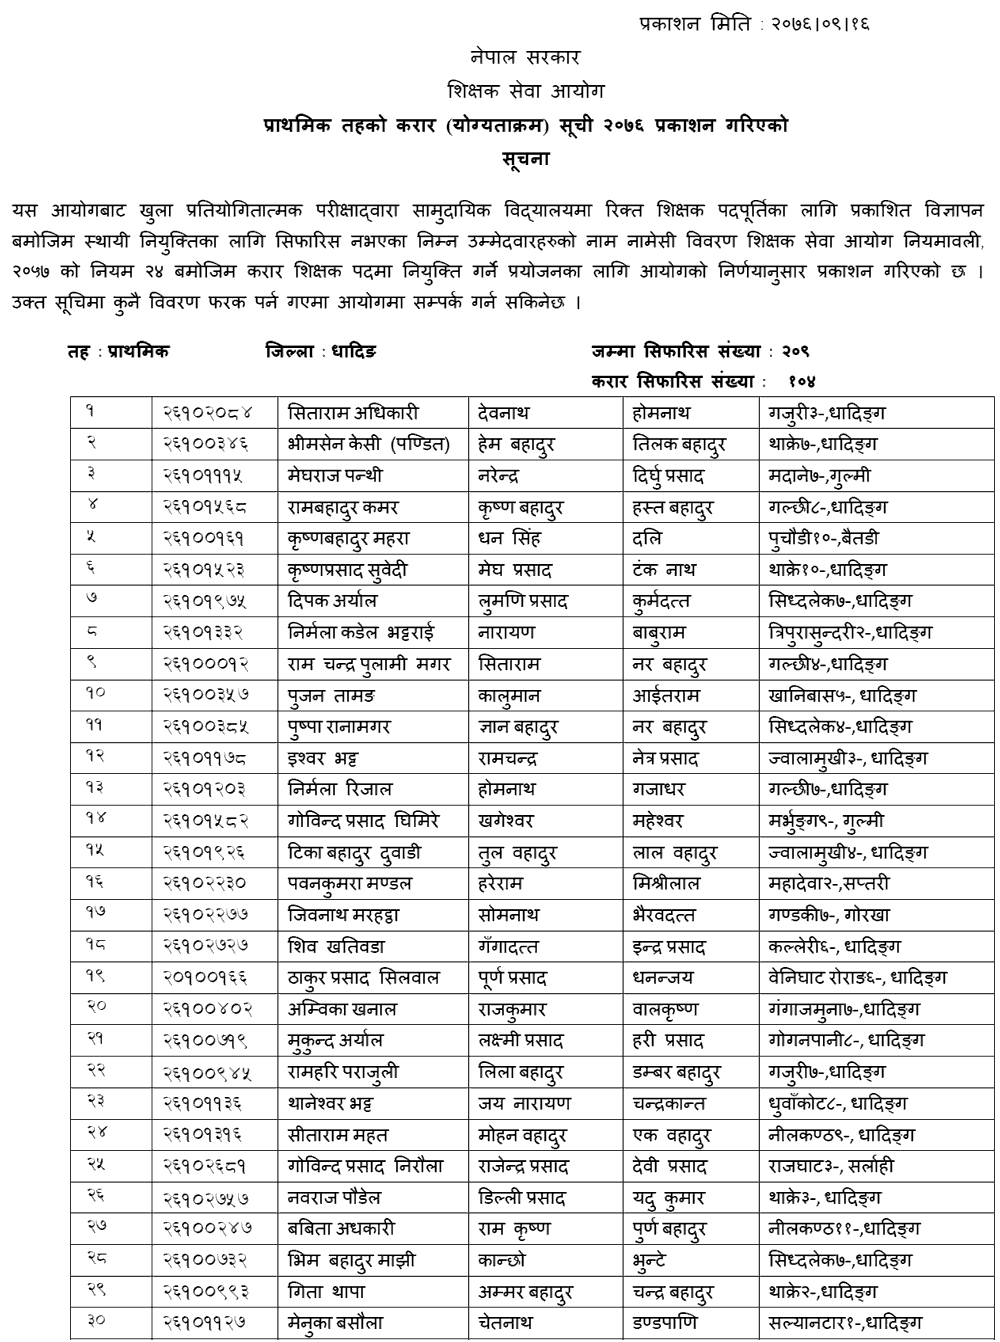 TSC Published Primary Level Contract List of Sindhupalchwok, Dhading and Makawanpur